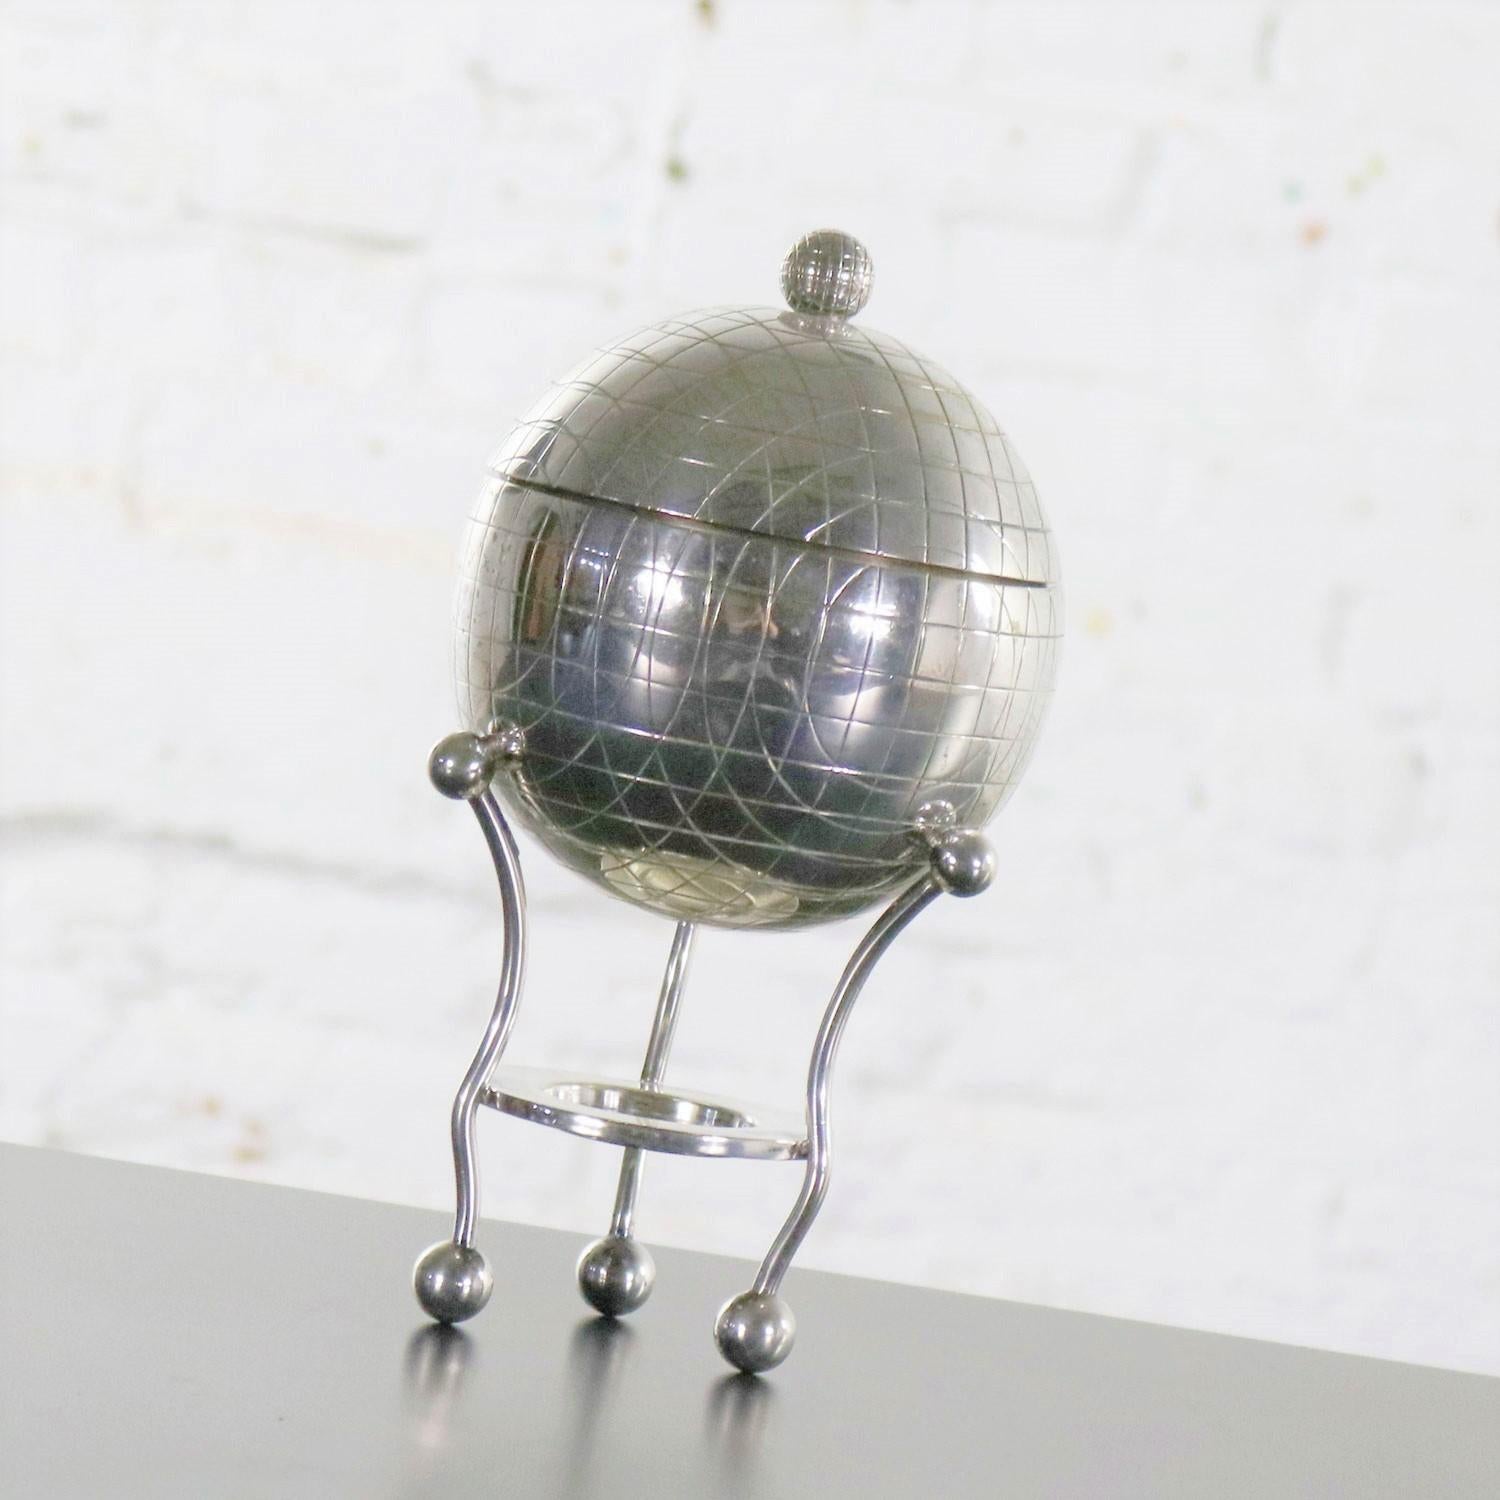 Latham & Morton Silver Plate Egg Warmer Globe Orb Shape Victorian In Good Condition For Sale In Topeka, KS